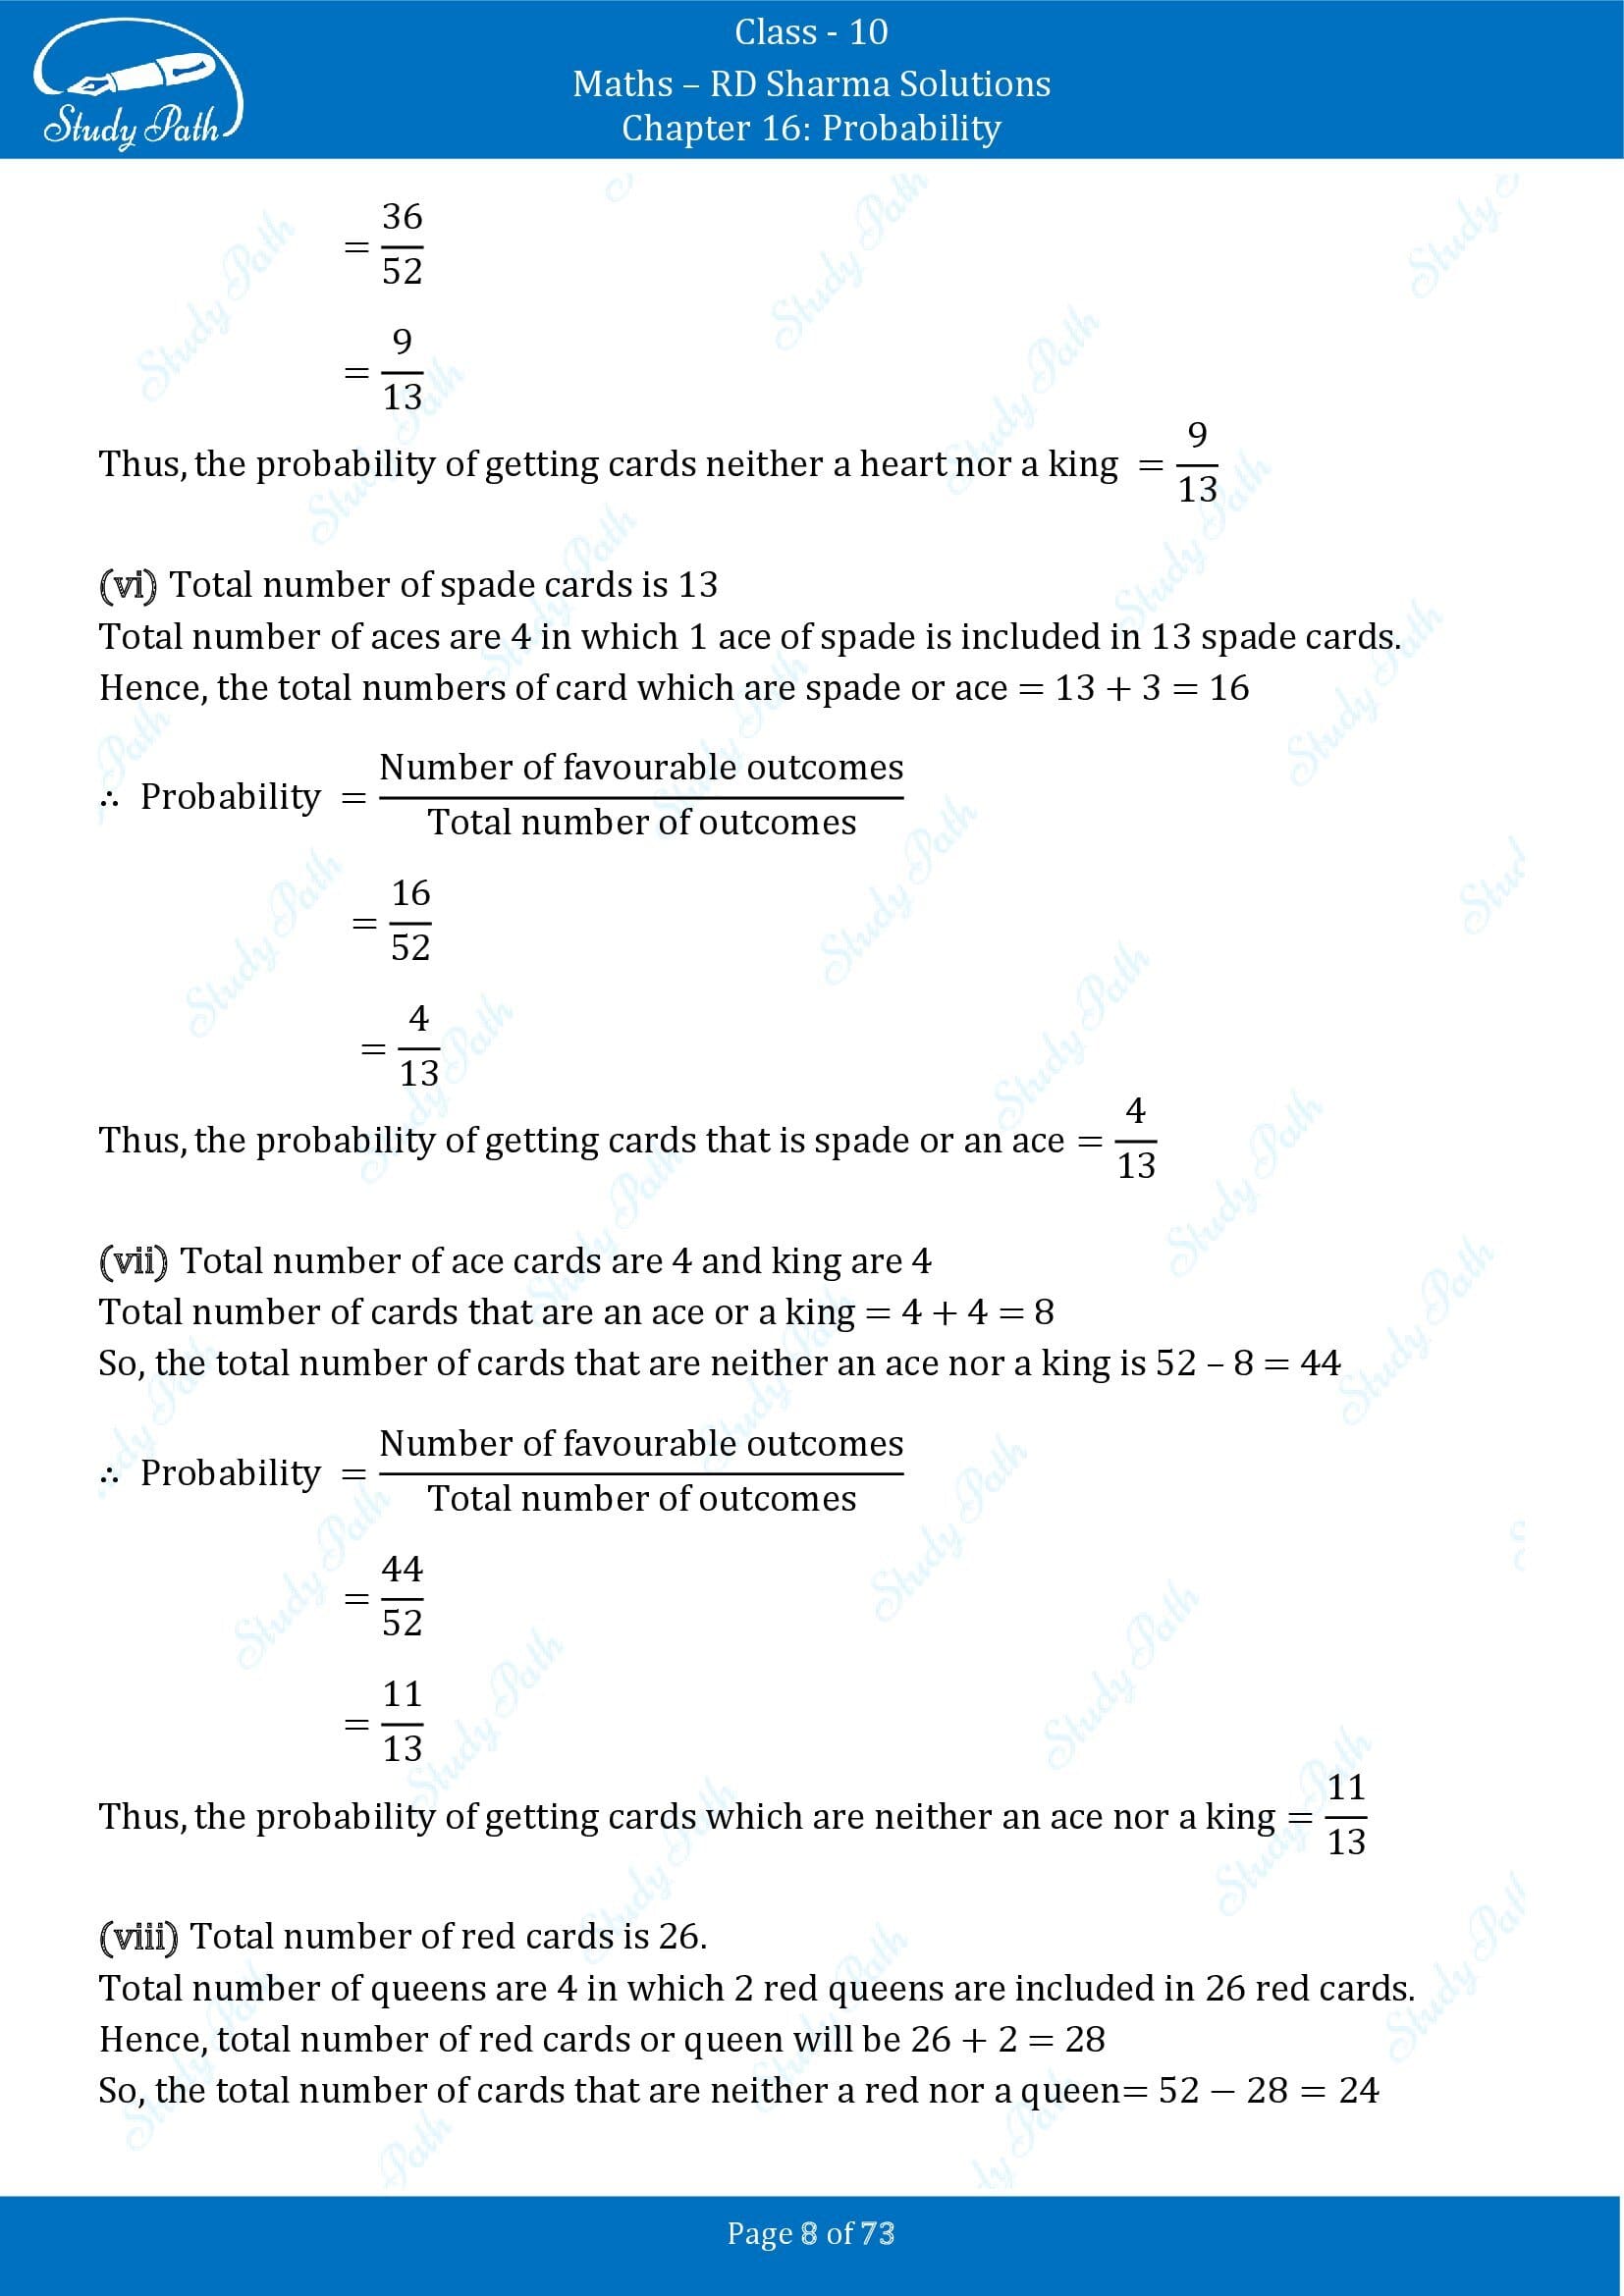 RD Sharma Solutions Class 10 Chapter 16 Probability Exercise 16.1 00008